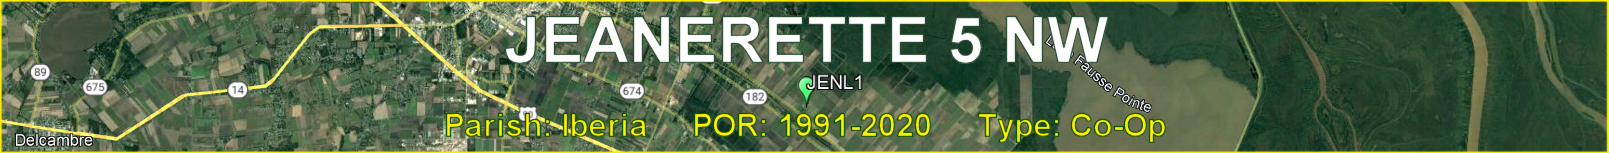 Title image for Jeanerette 5 NW